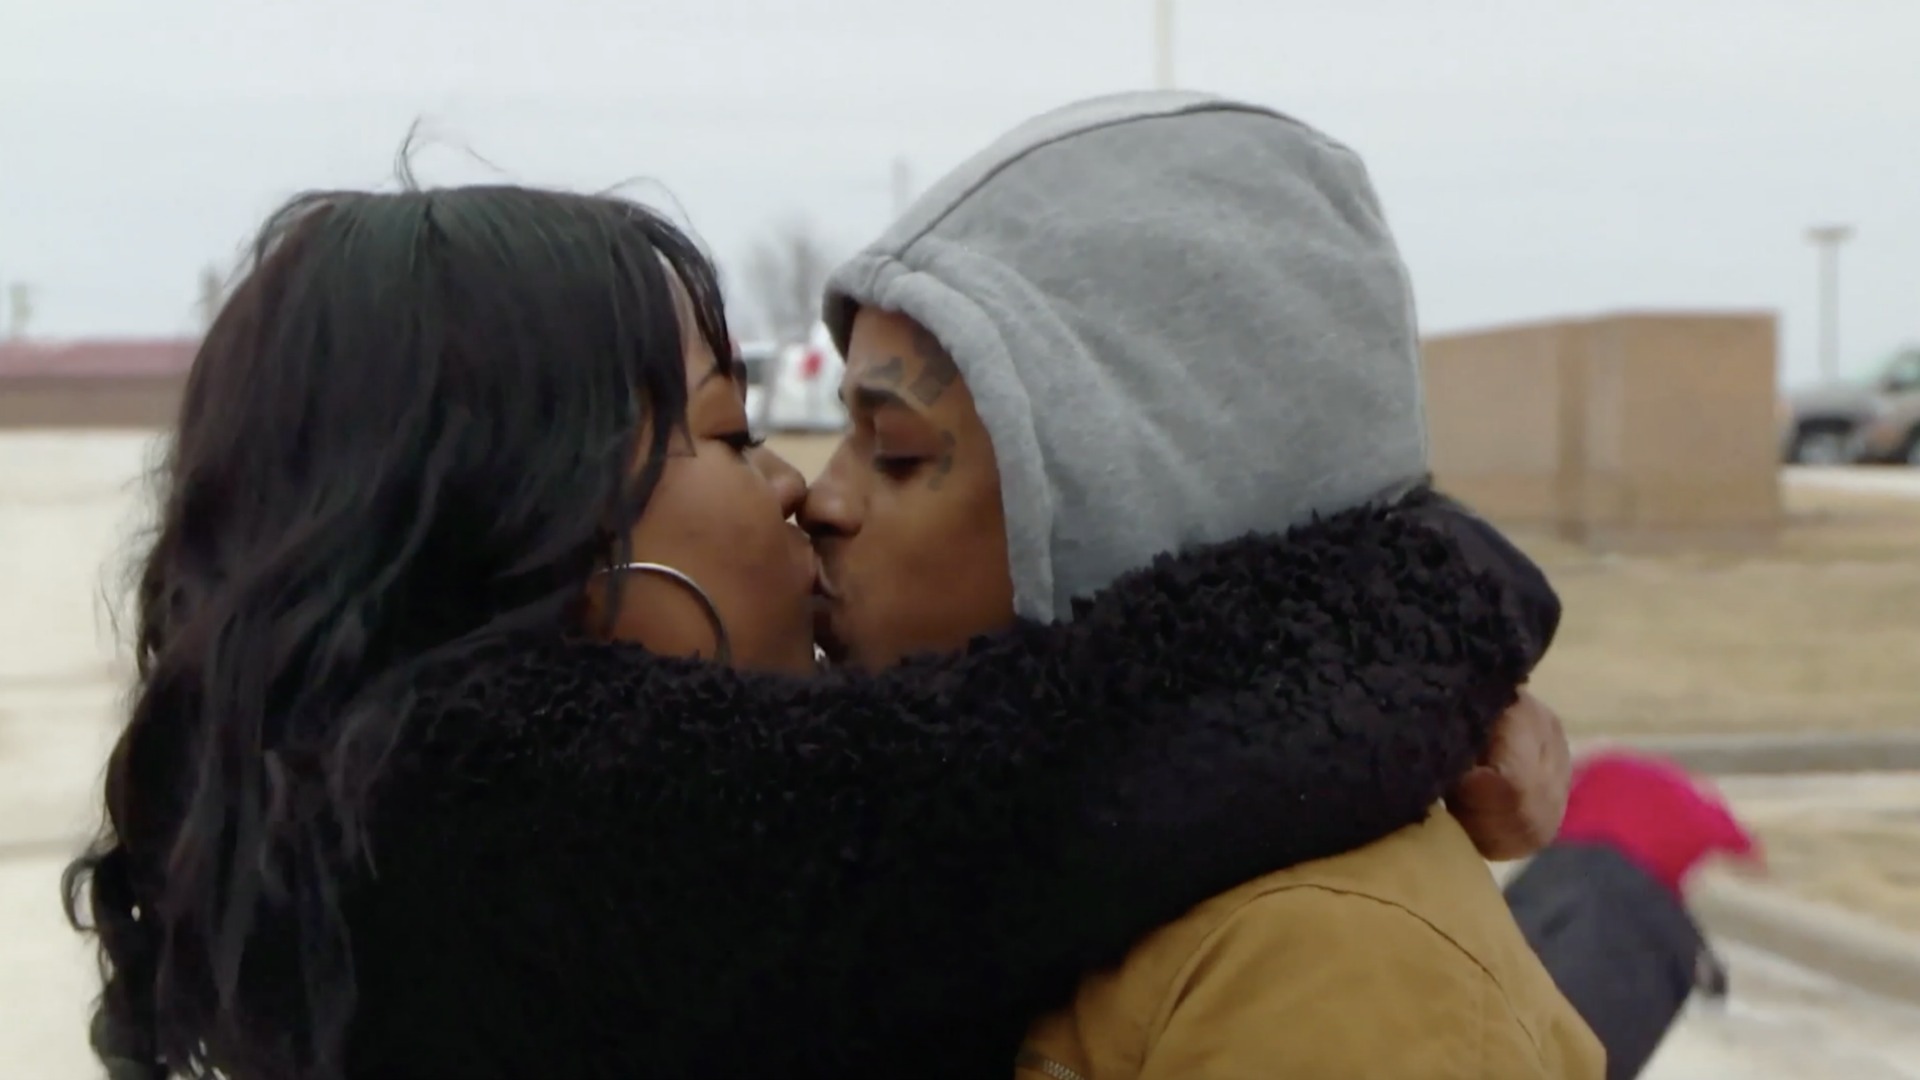 Watch Quaylon Is a Free Man! | Love After Lockup Video Extras